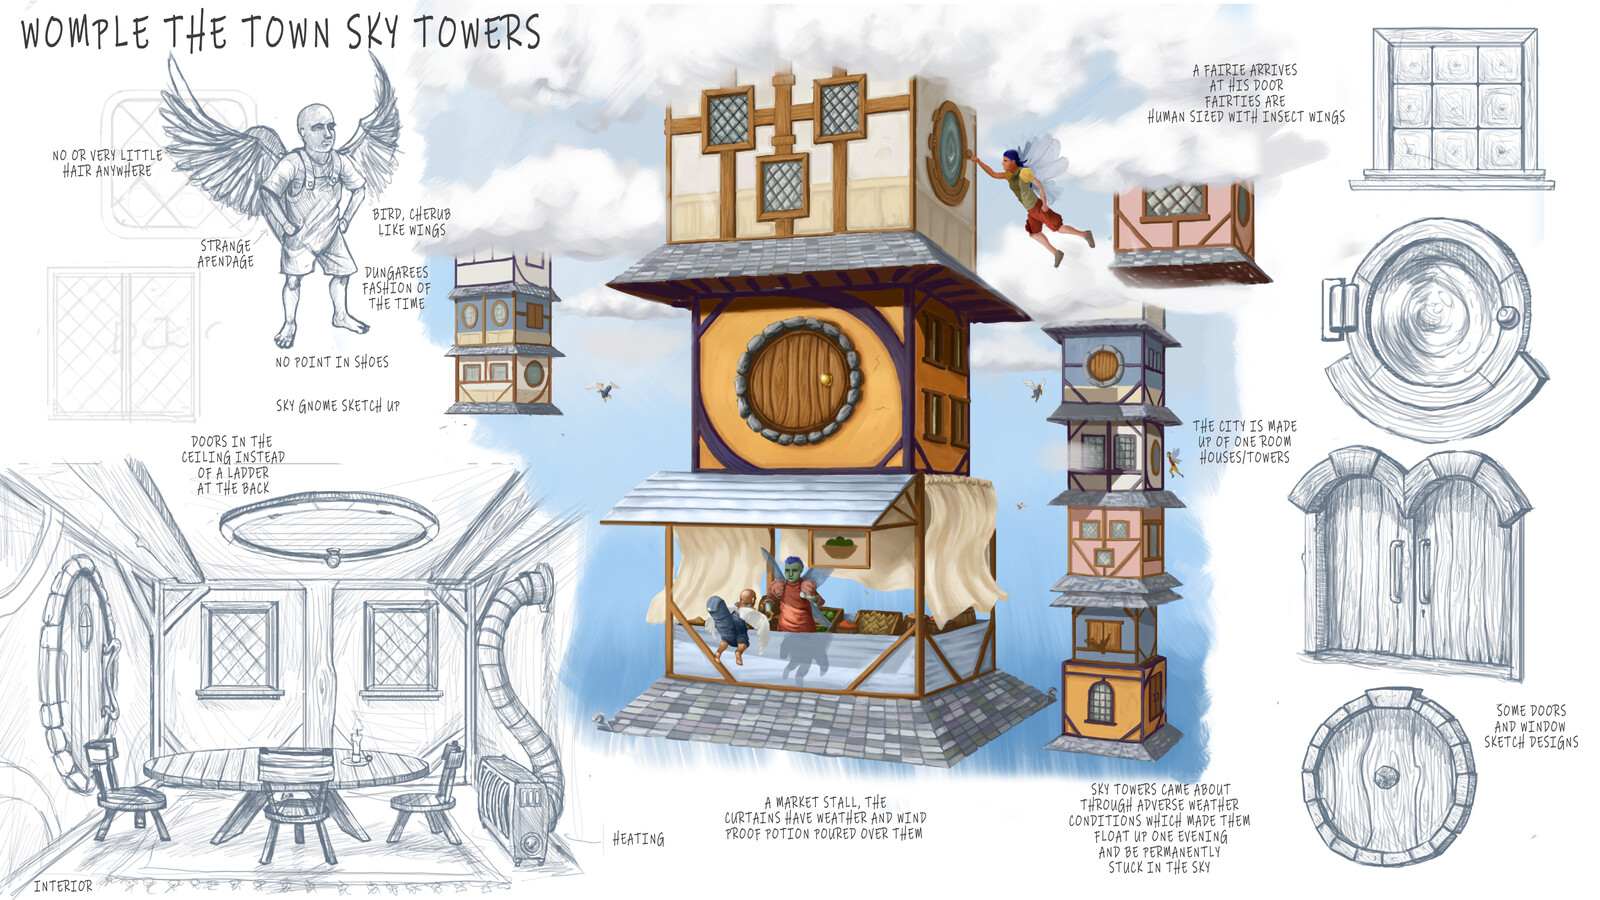 Womple Town Sky concepts